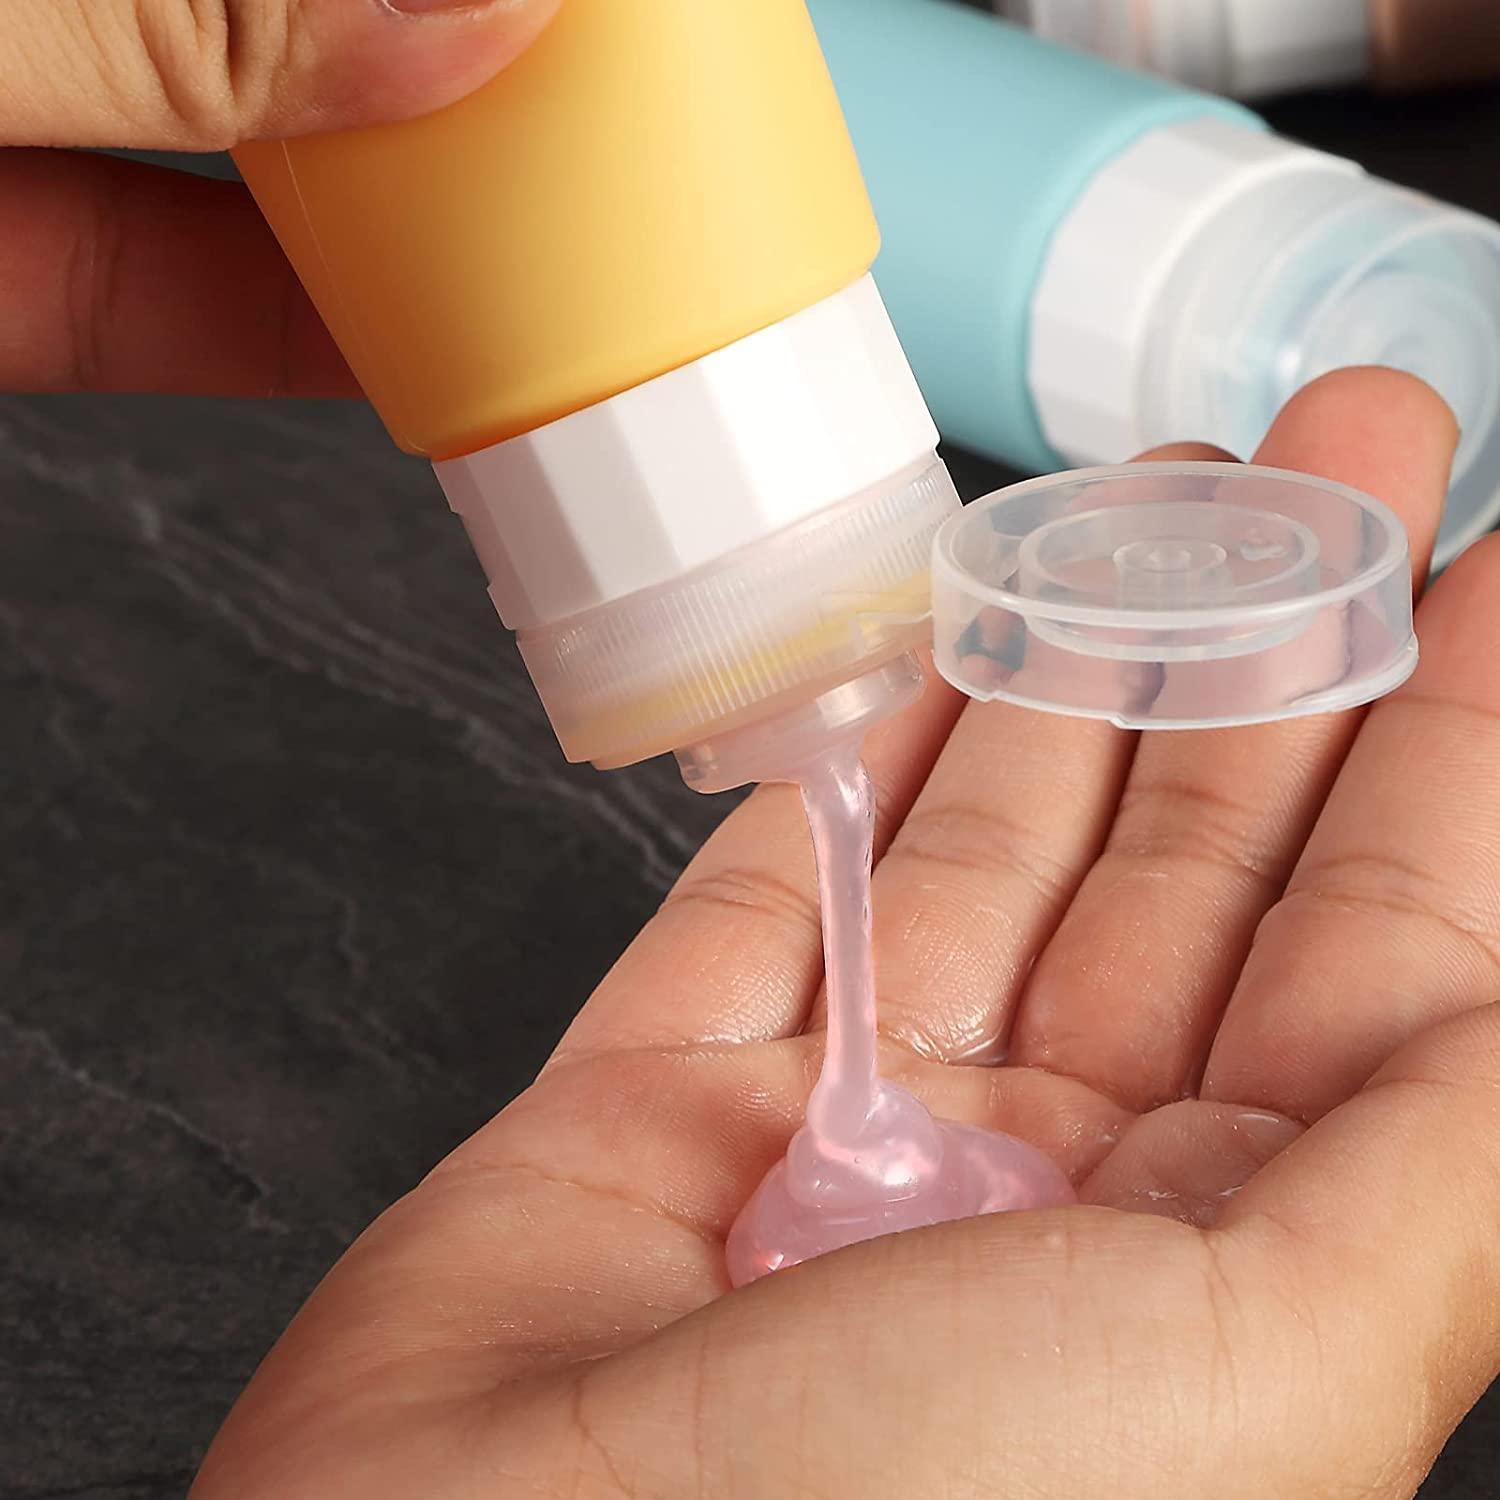 Shoppers Love the Gemice Silicone Travel-size Bottles